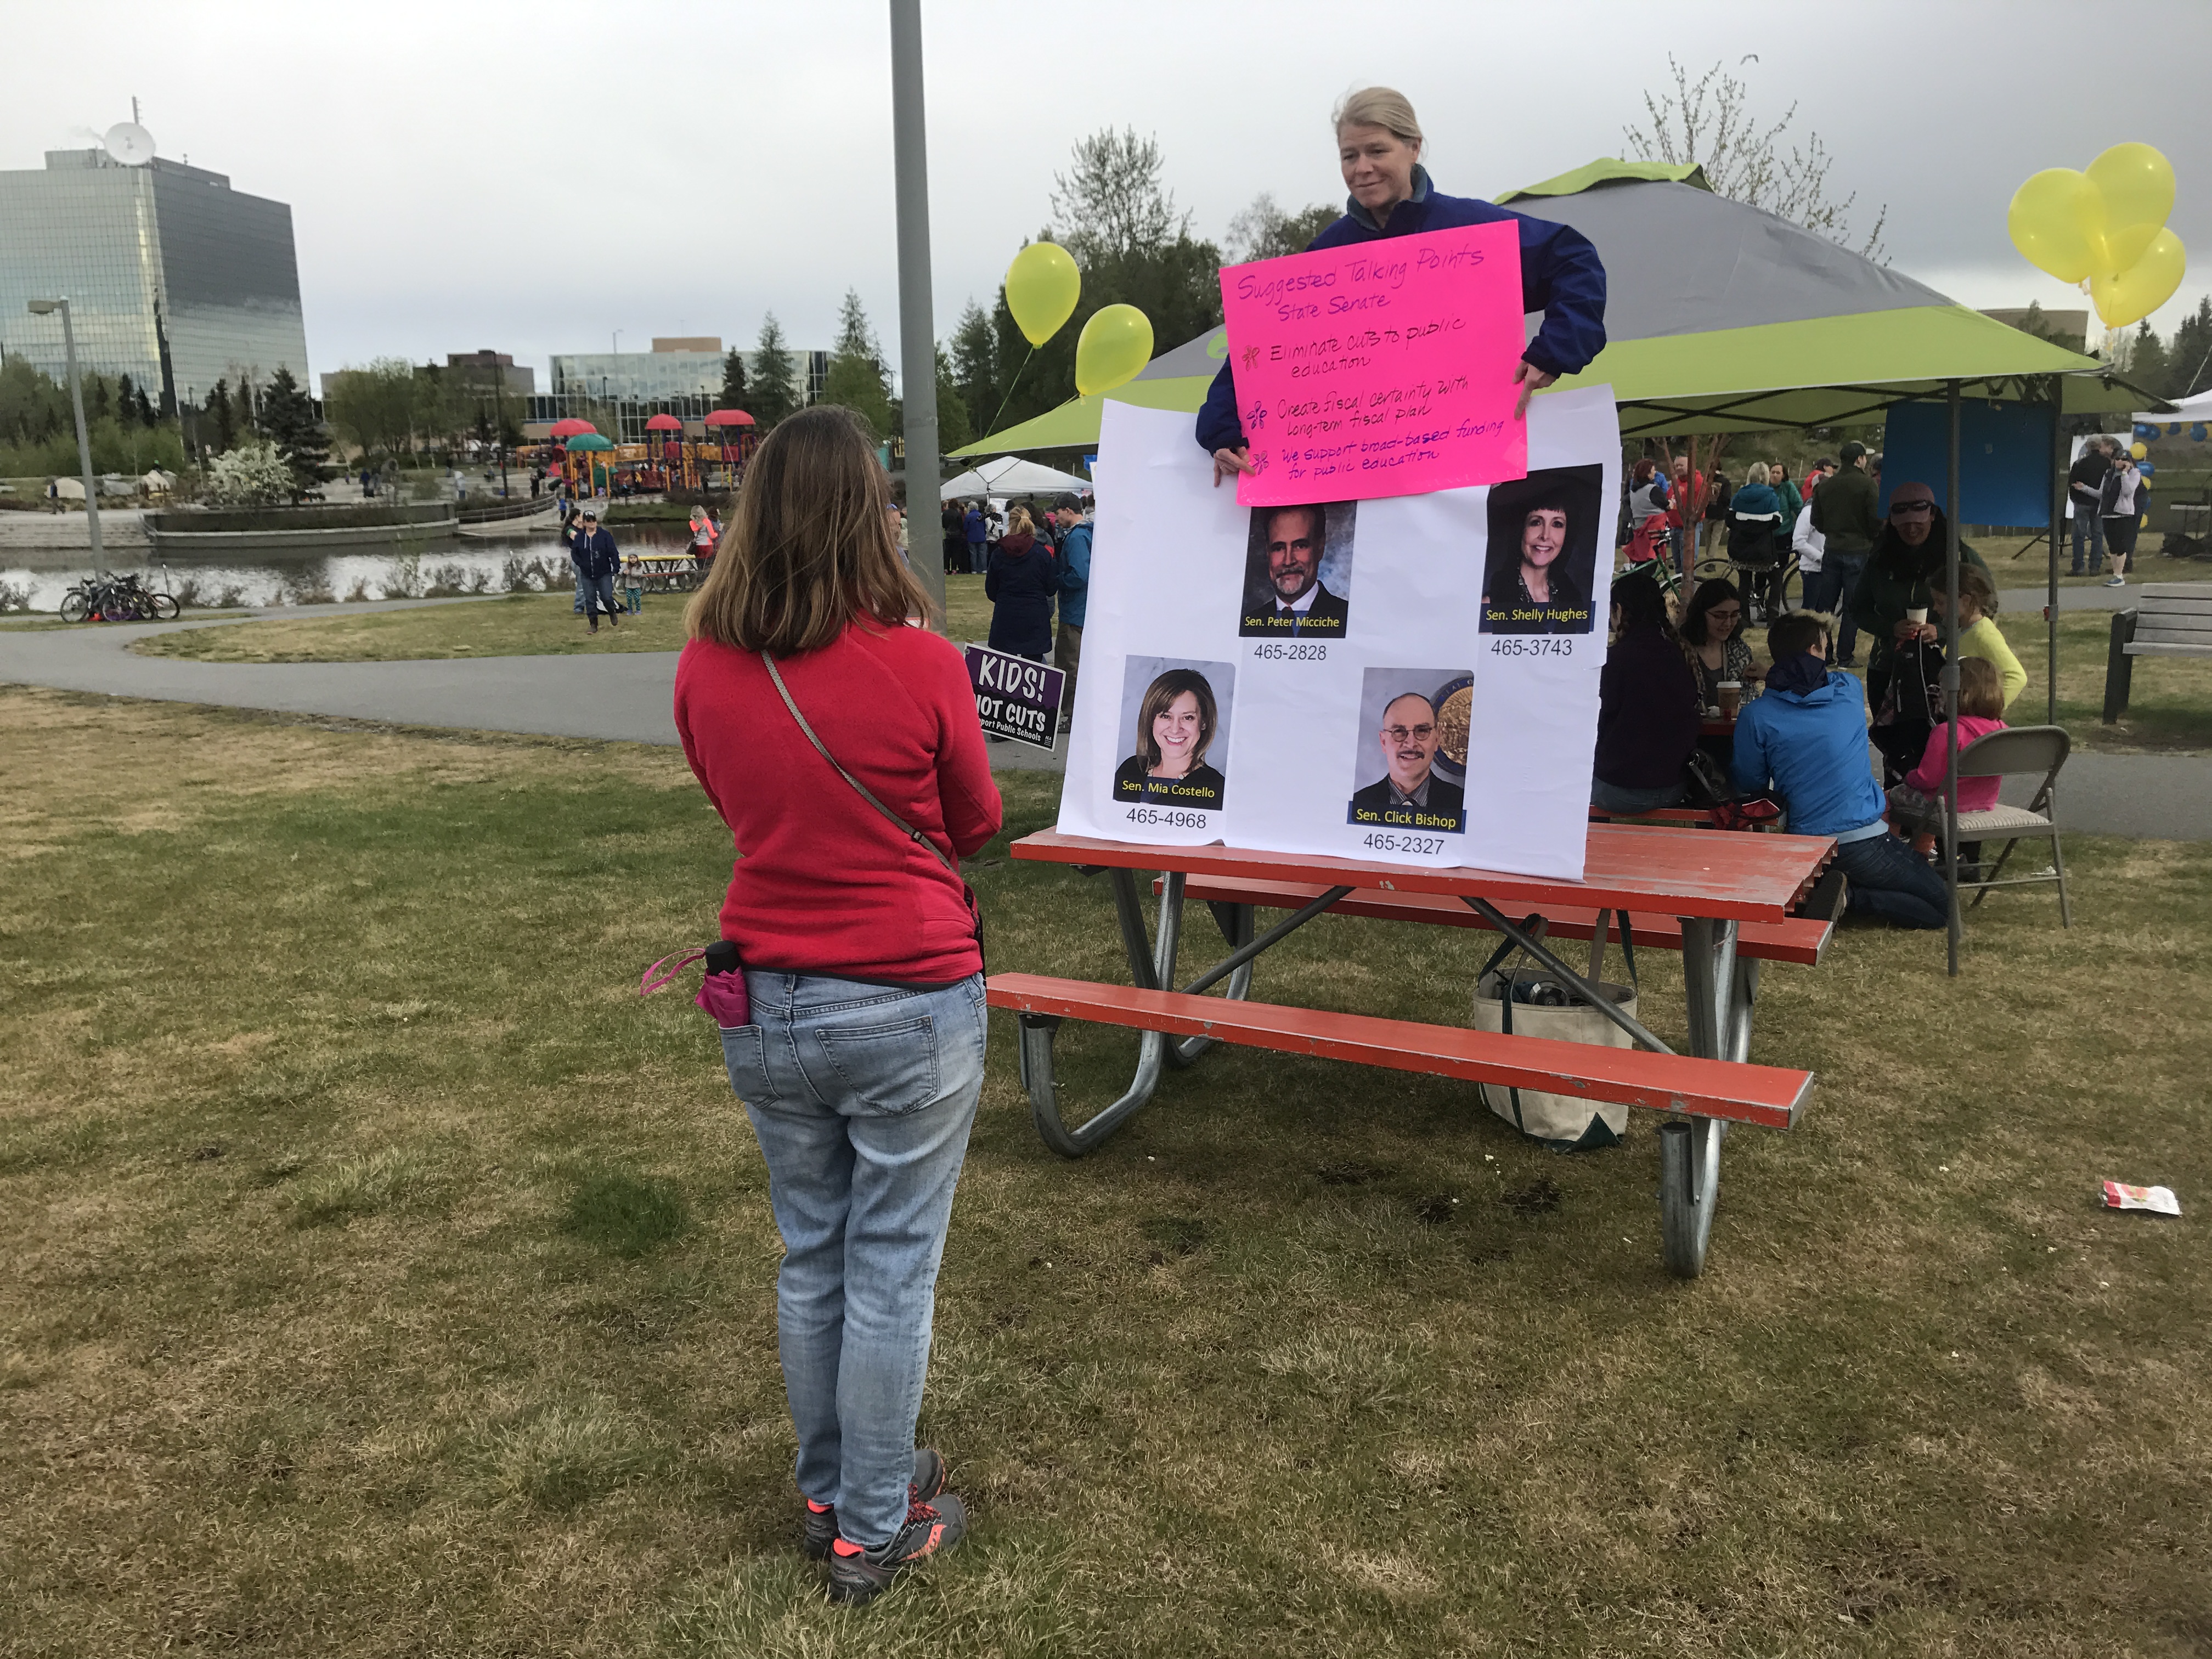 Alaskans call lawmakers’ offices, pushing for support for education funding on Saturday, May 20, 2017. (Photo by Josh Edge/Alaska Public Media)